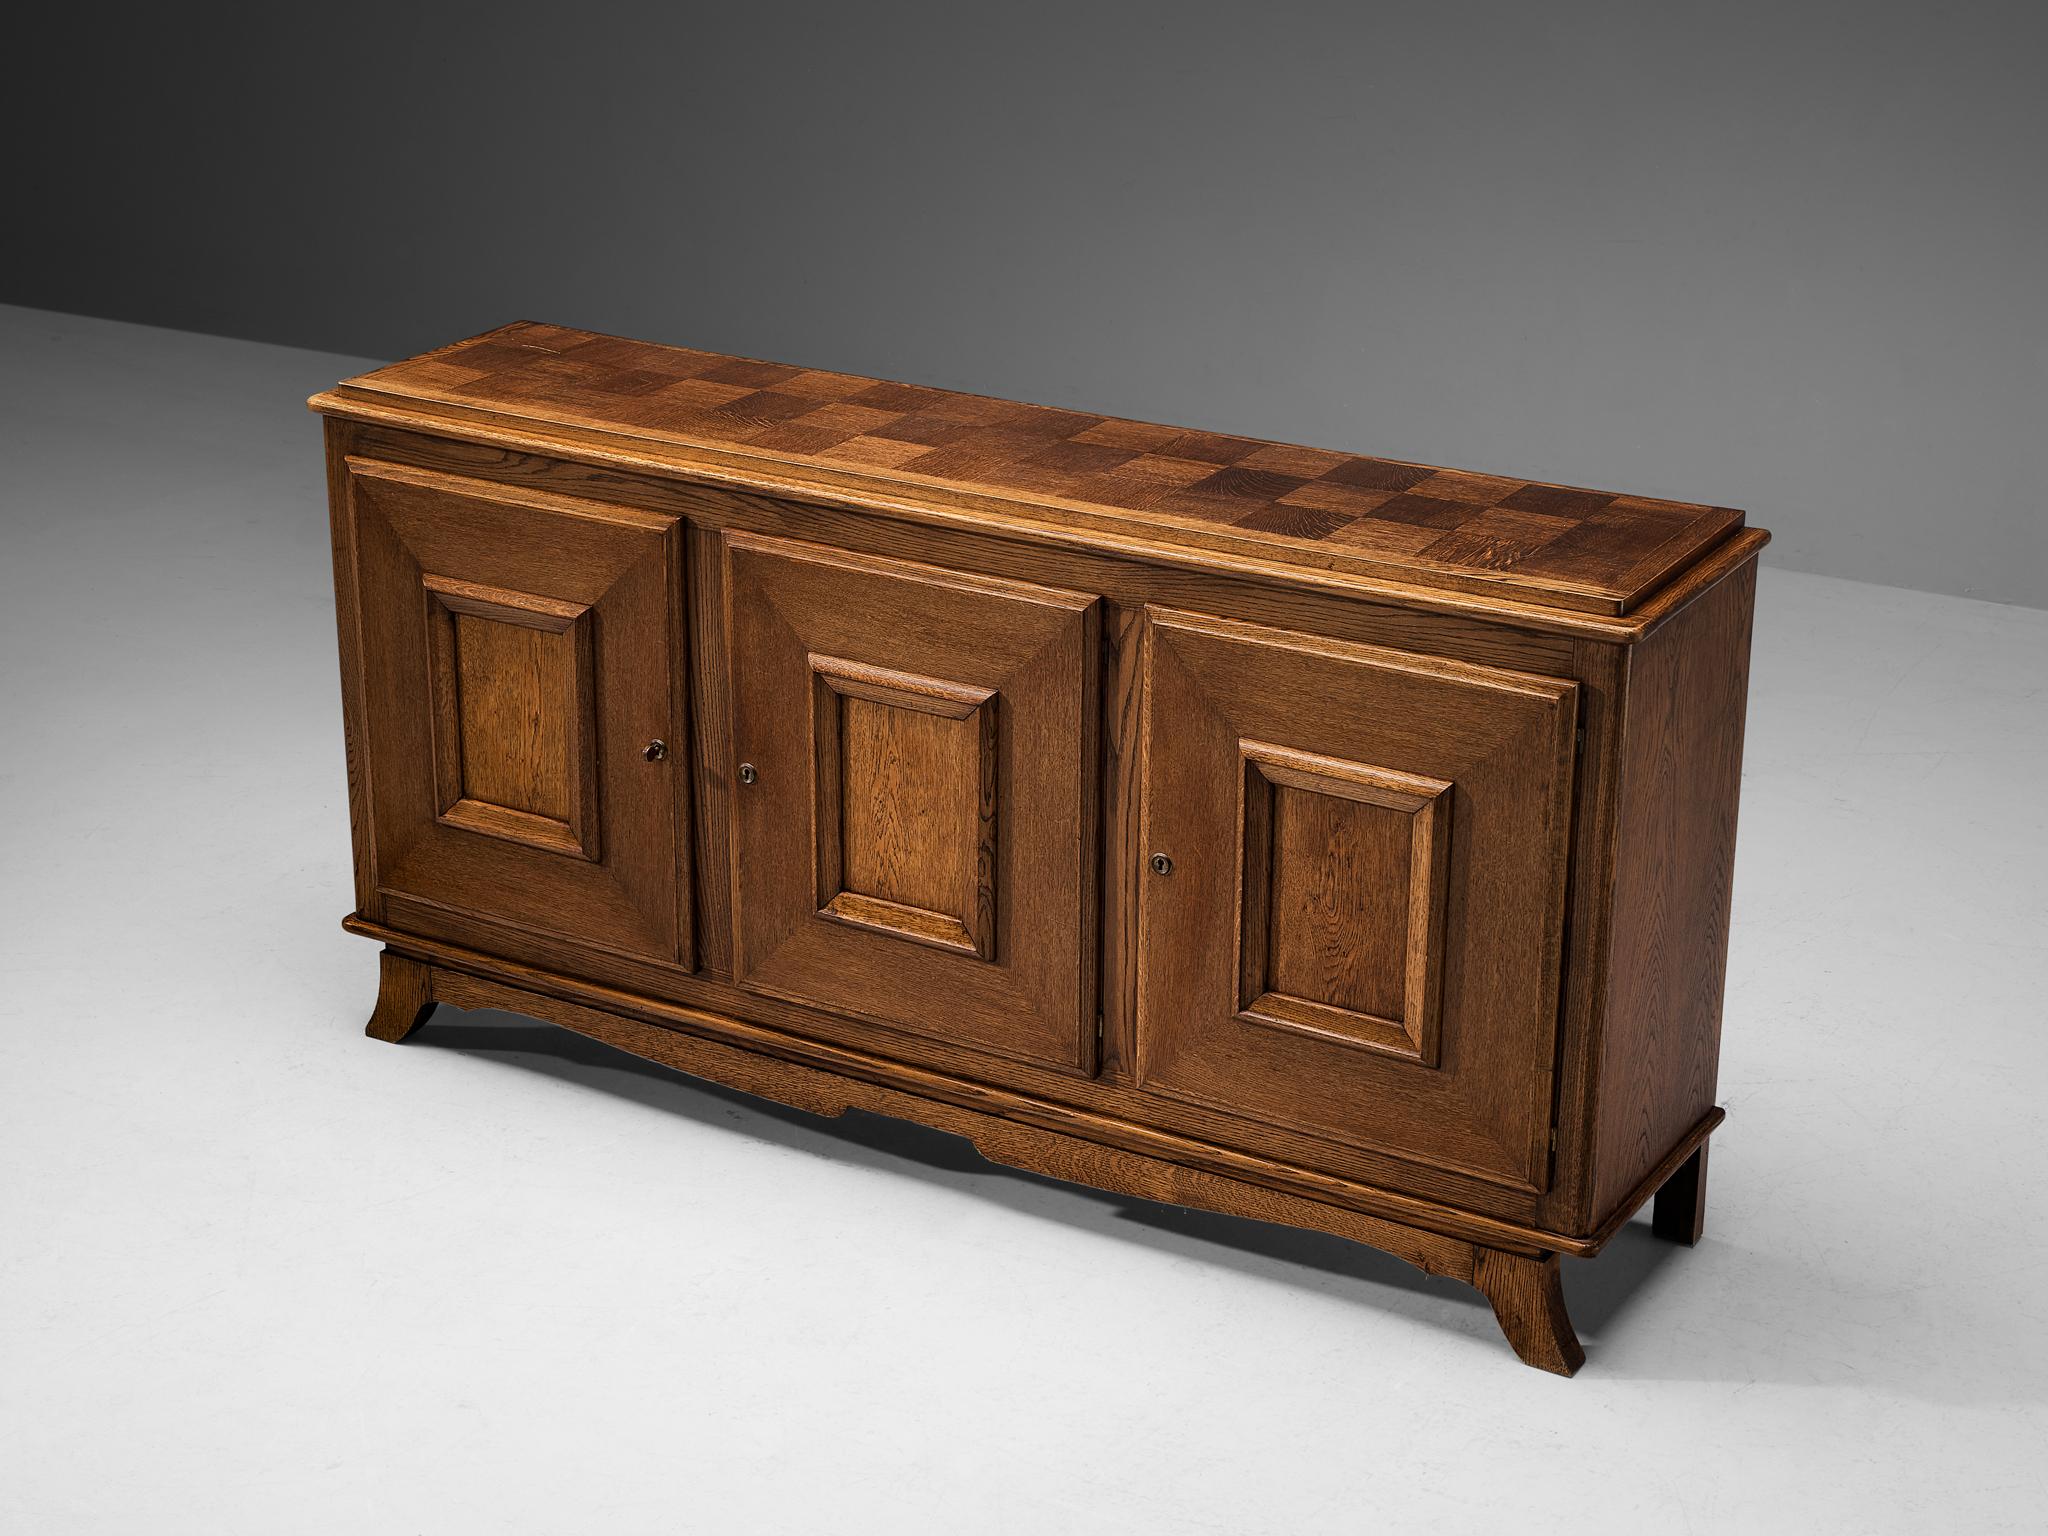 Sideboard, oak, France, 1940s

This sideboard made in oak has very nice and distinct features. For example the inlayed checkered top, the rectangular panelling on the three doors, and the tapered front legs of the piece that point outwards. Also,